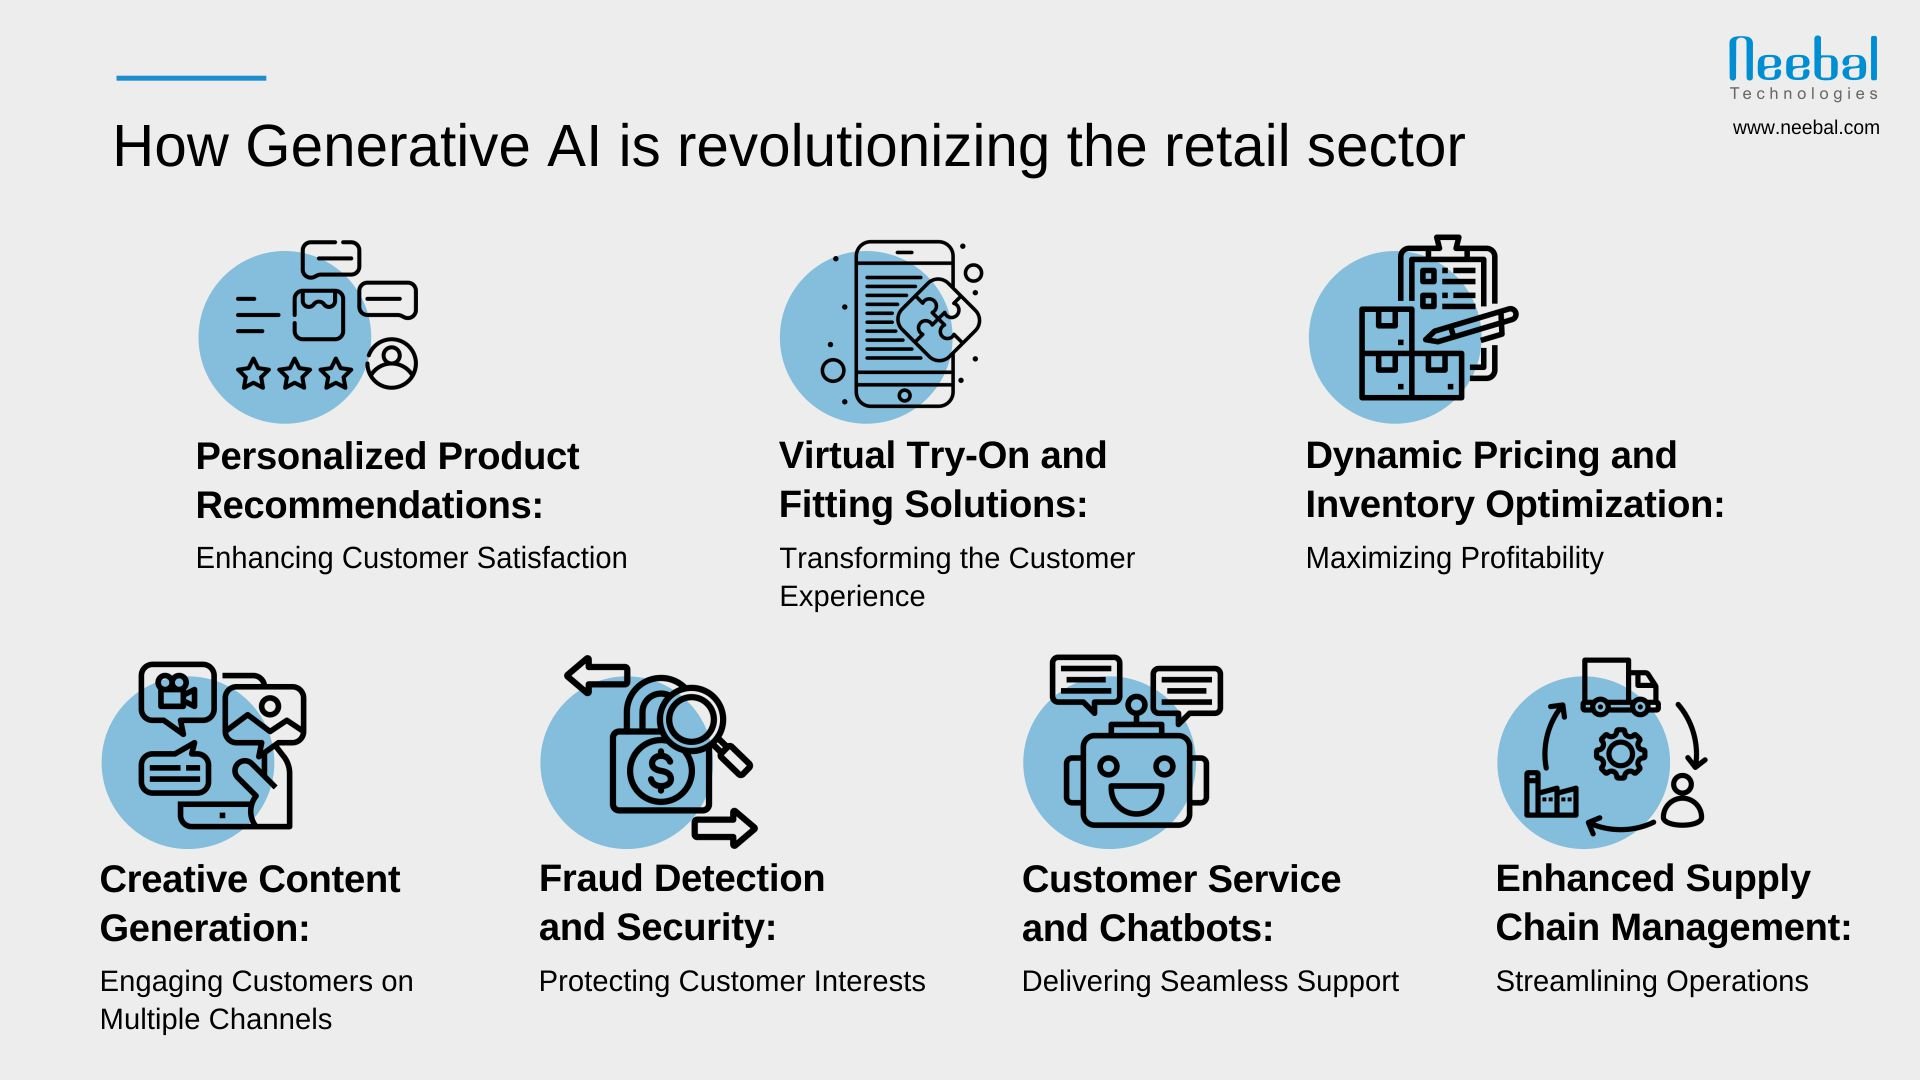 How Generative AI is revolutionizing the retail sector-Infographic